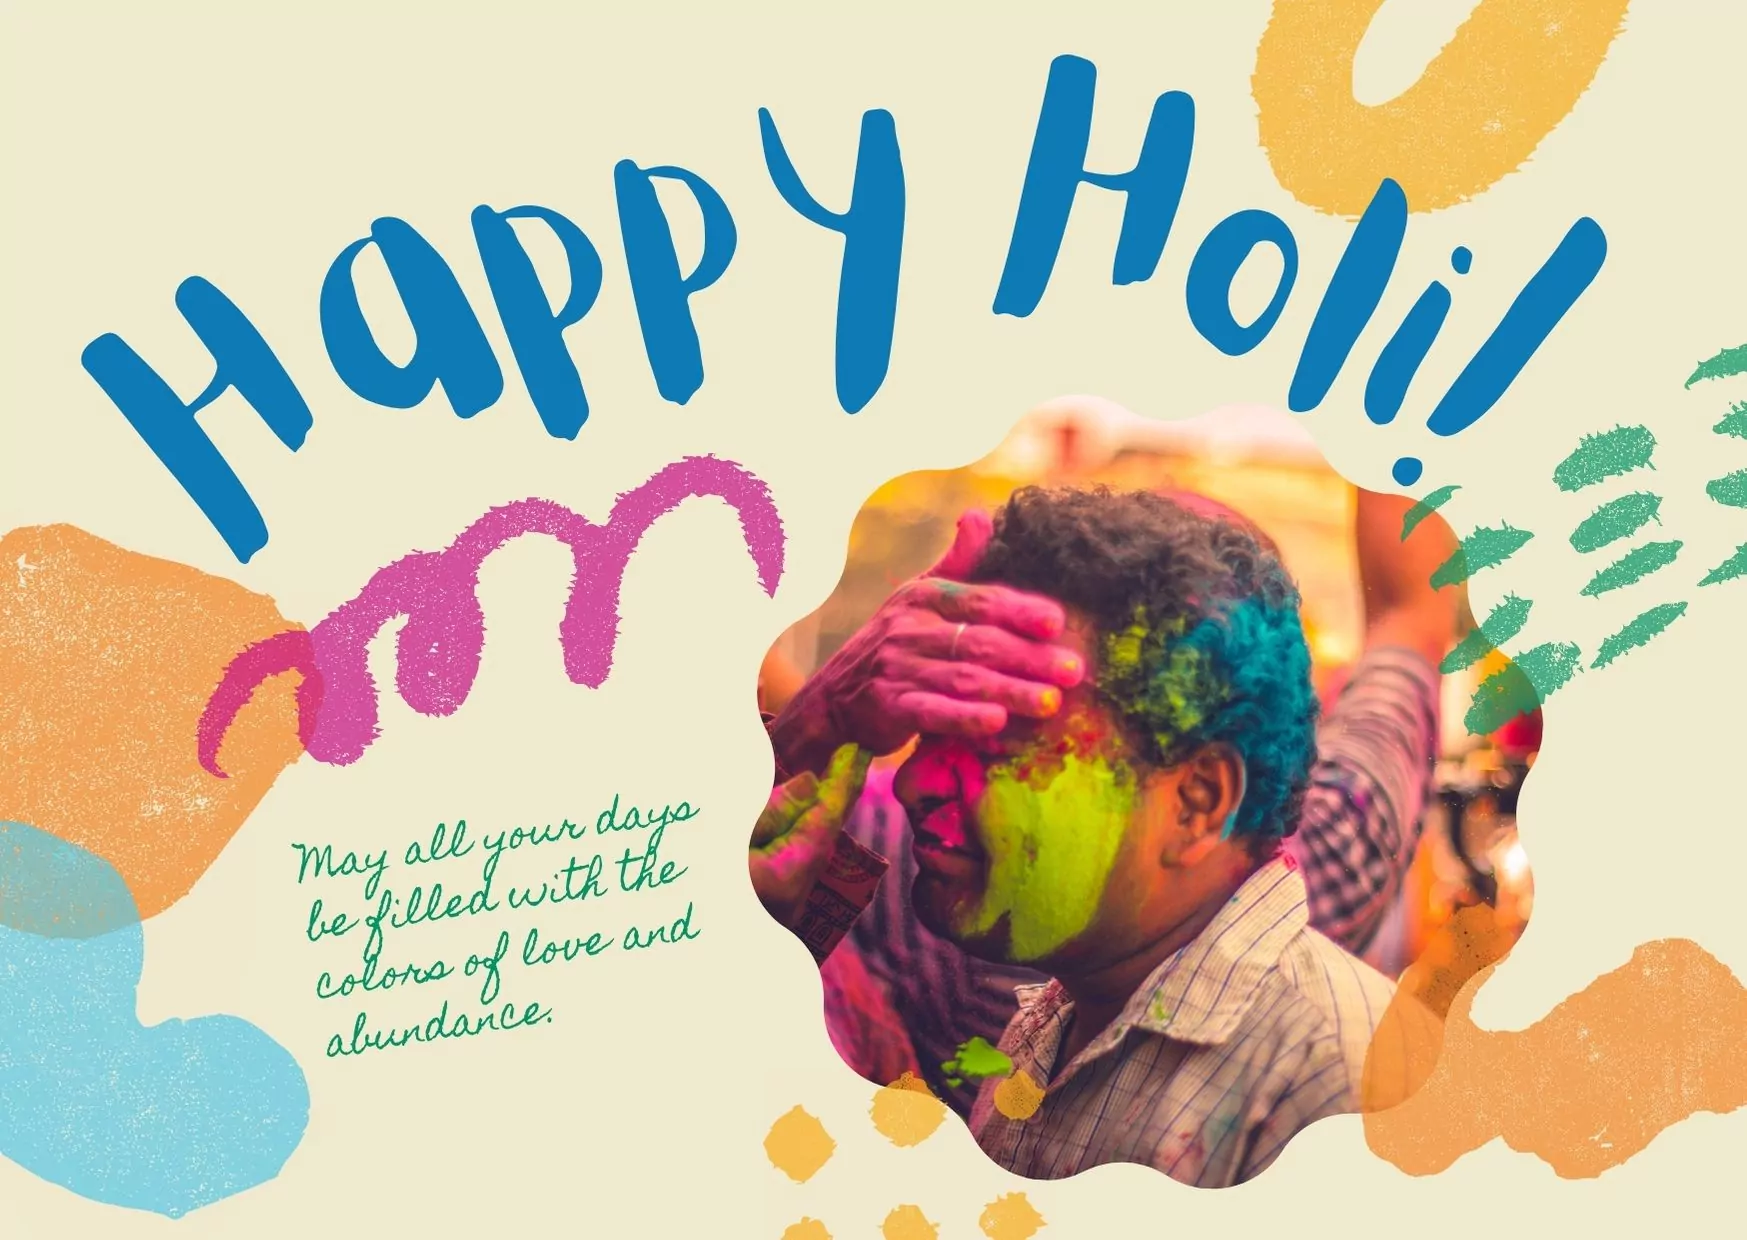 Happy Holi 2021 - Quotes, Status, Whatsapp Messages, Wishes, Images